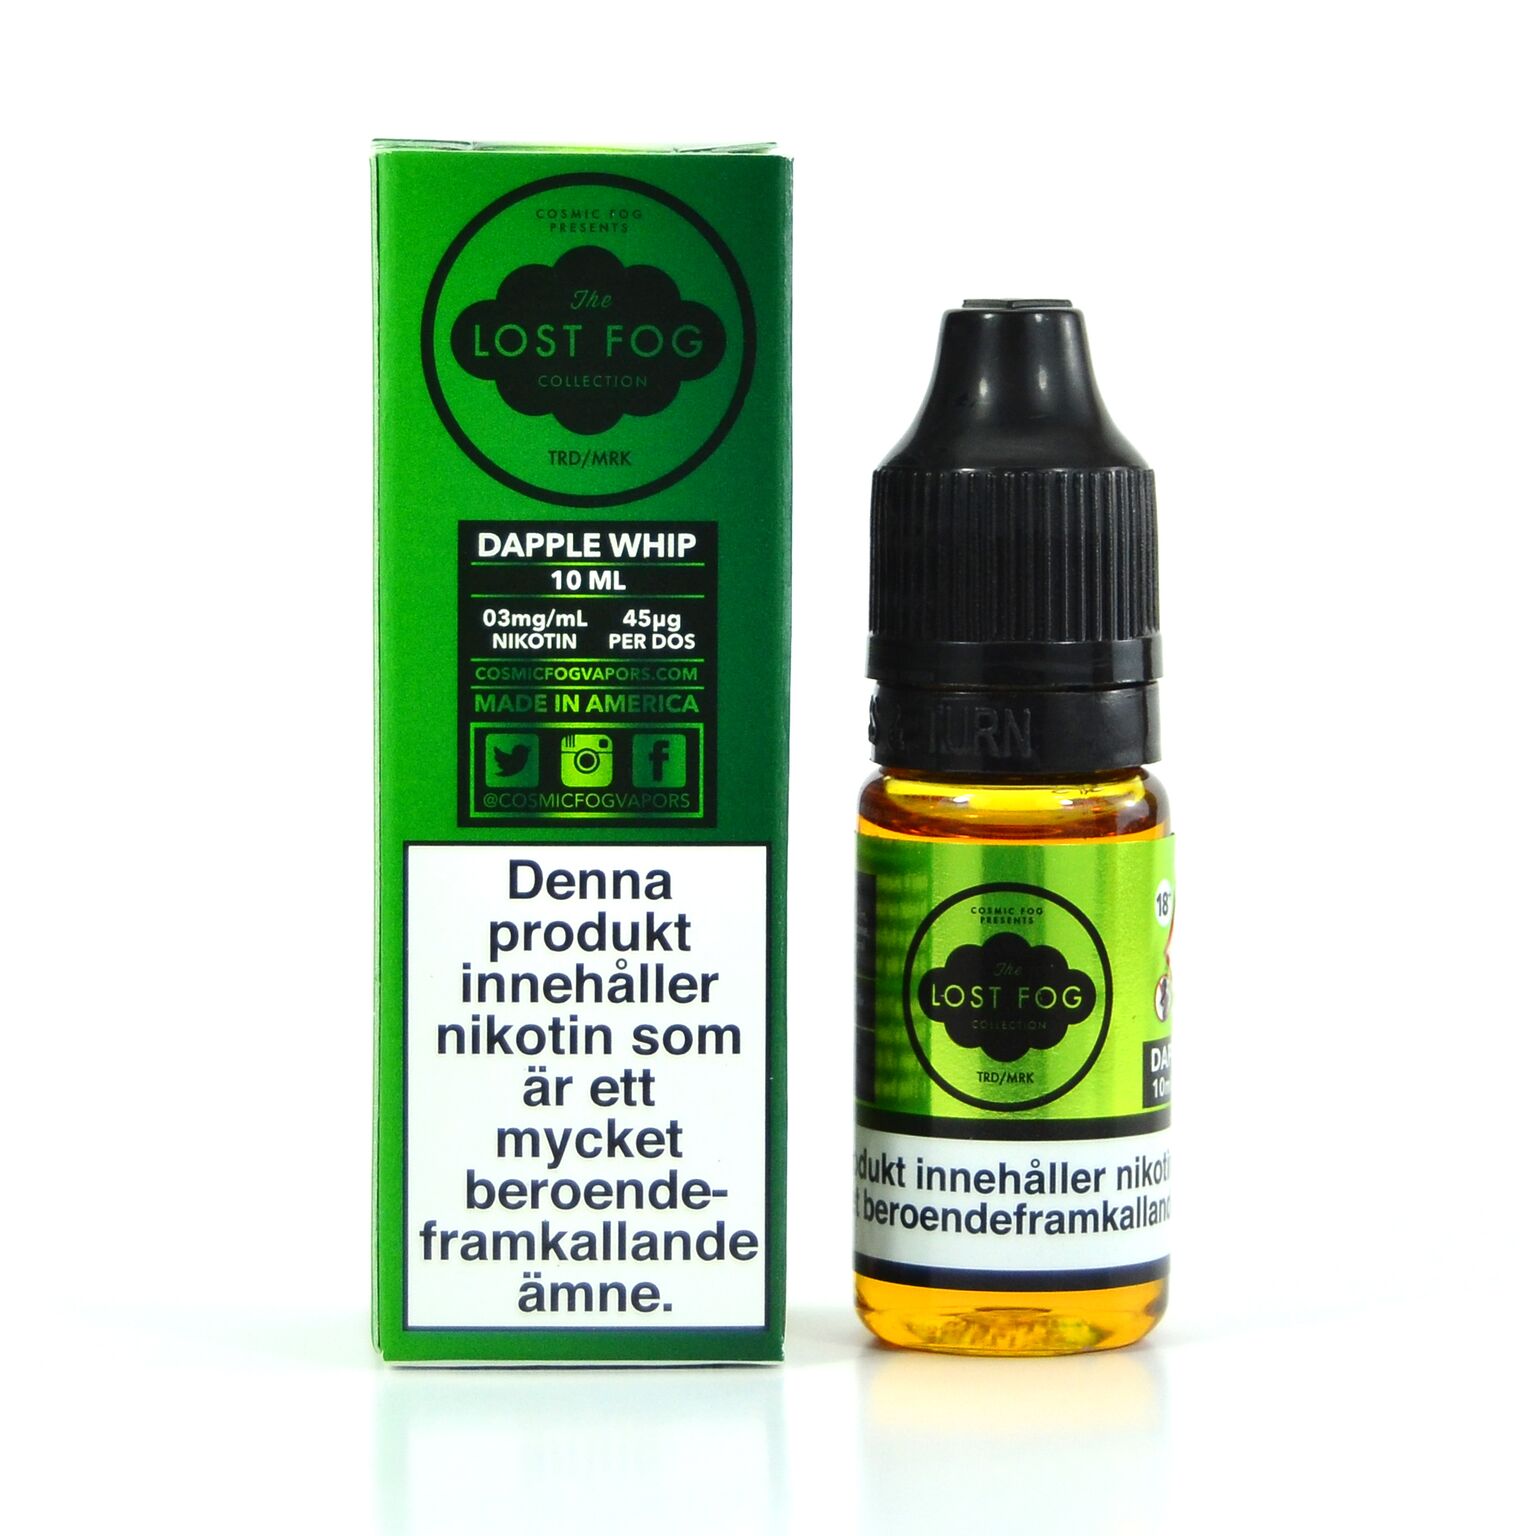 Lost Fog Dapple Whip e-juice with nicotione